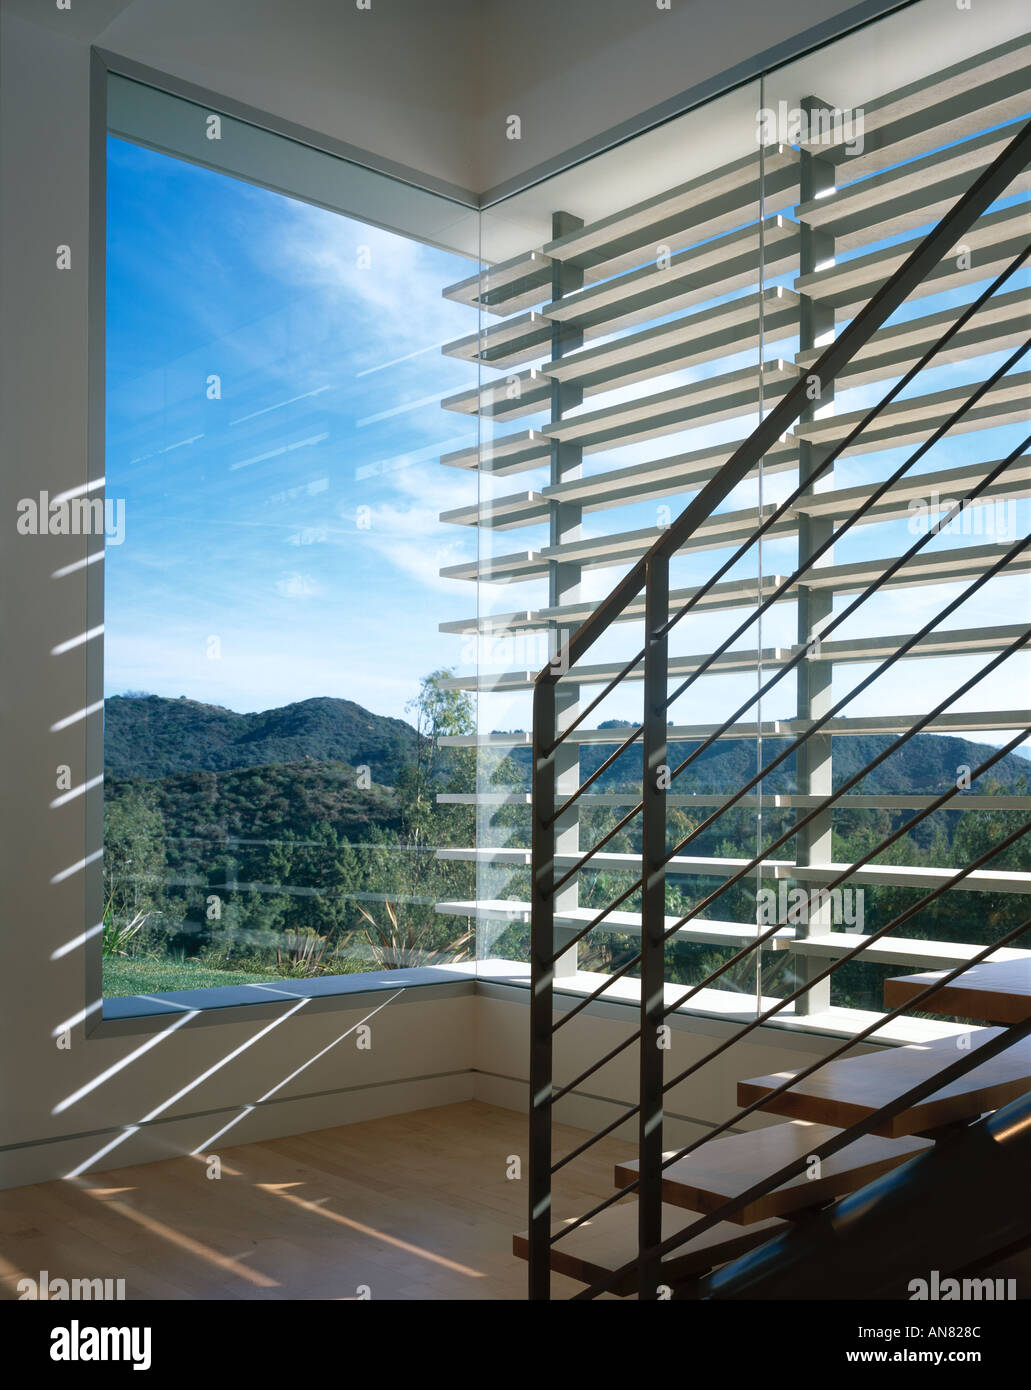 Oshry Residence, Bel Air, California. View of landscape from glass walls. Architect: SPF Architects Stock Photo